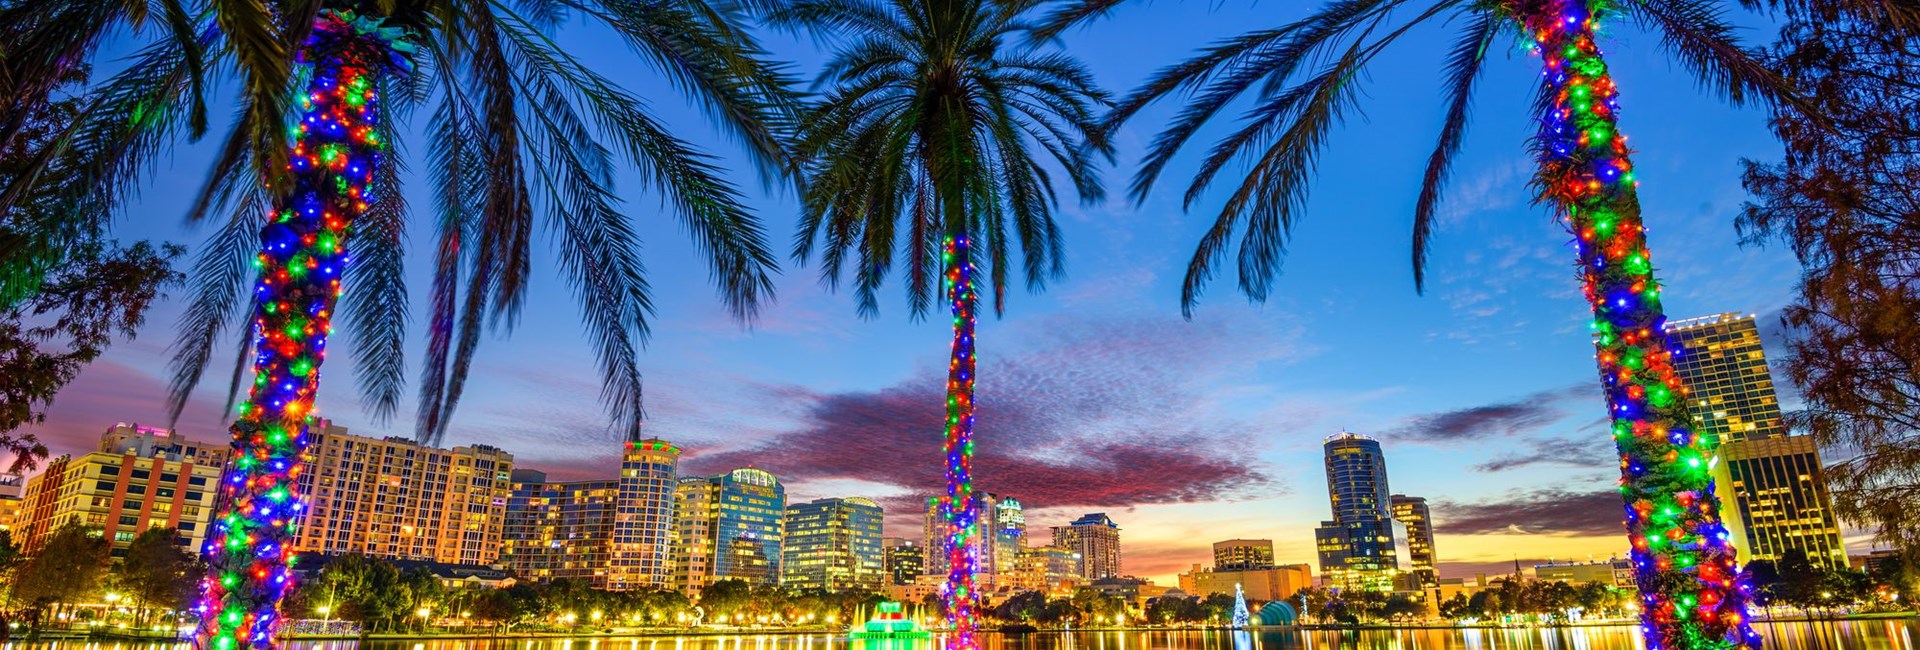 Orlando night time cityscape with colourful fairy lights wrapped around palm trees